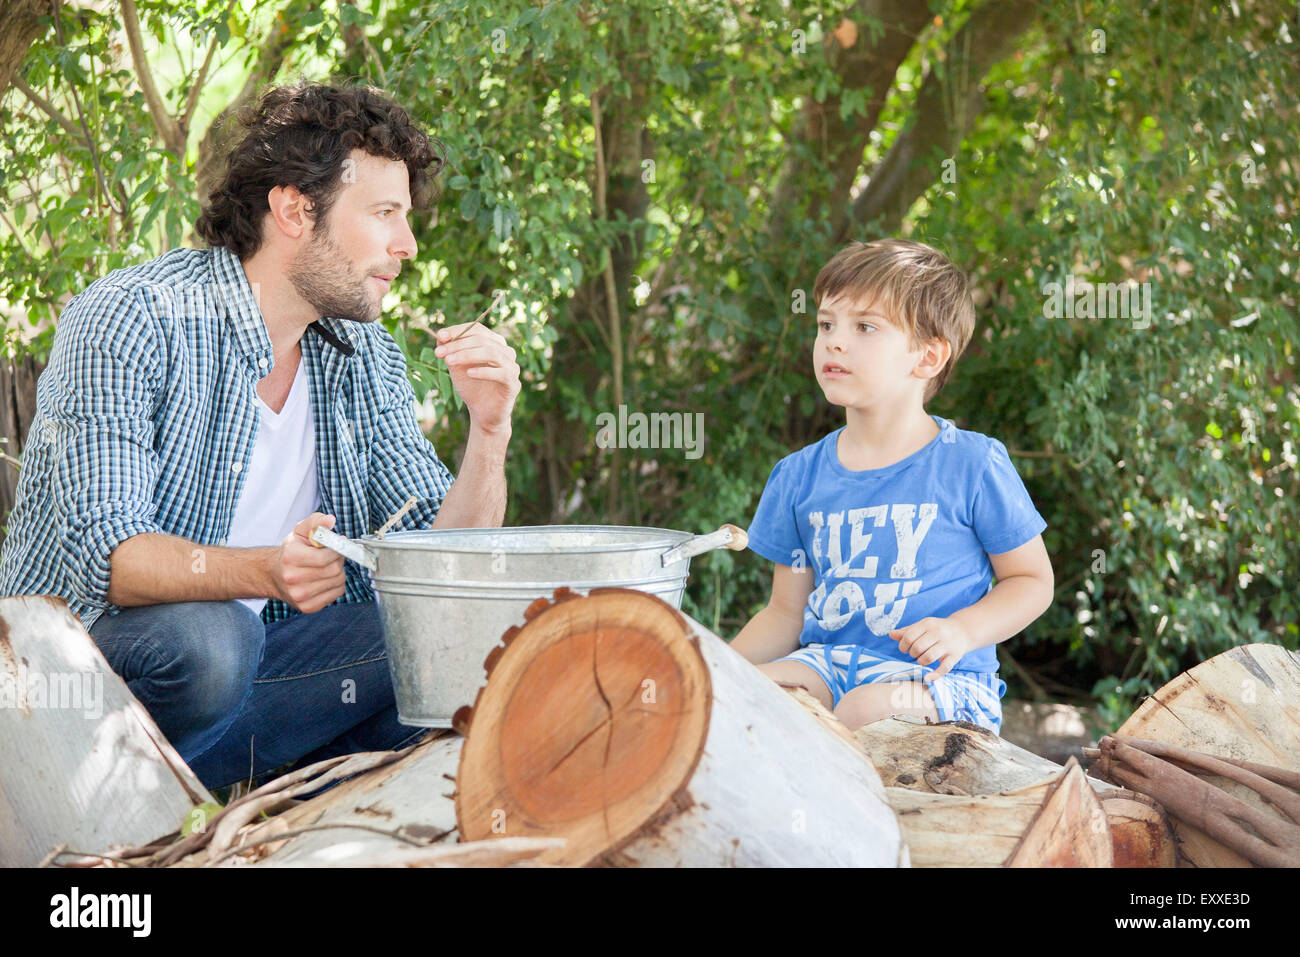 Father with young son chatting together outdoors Stock Photo